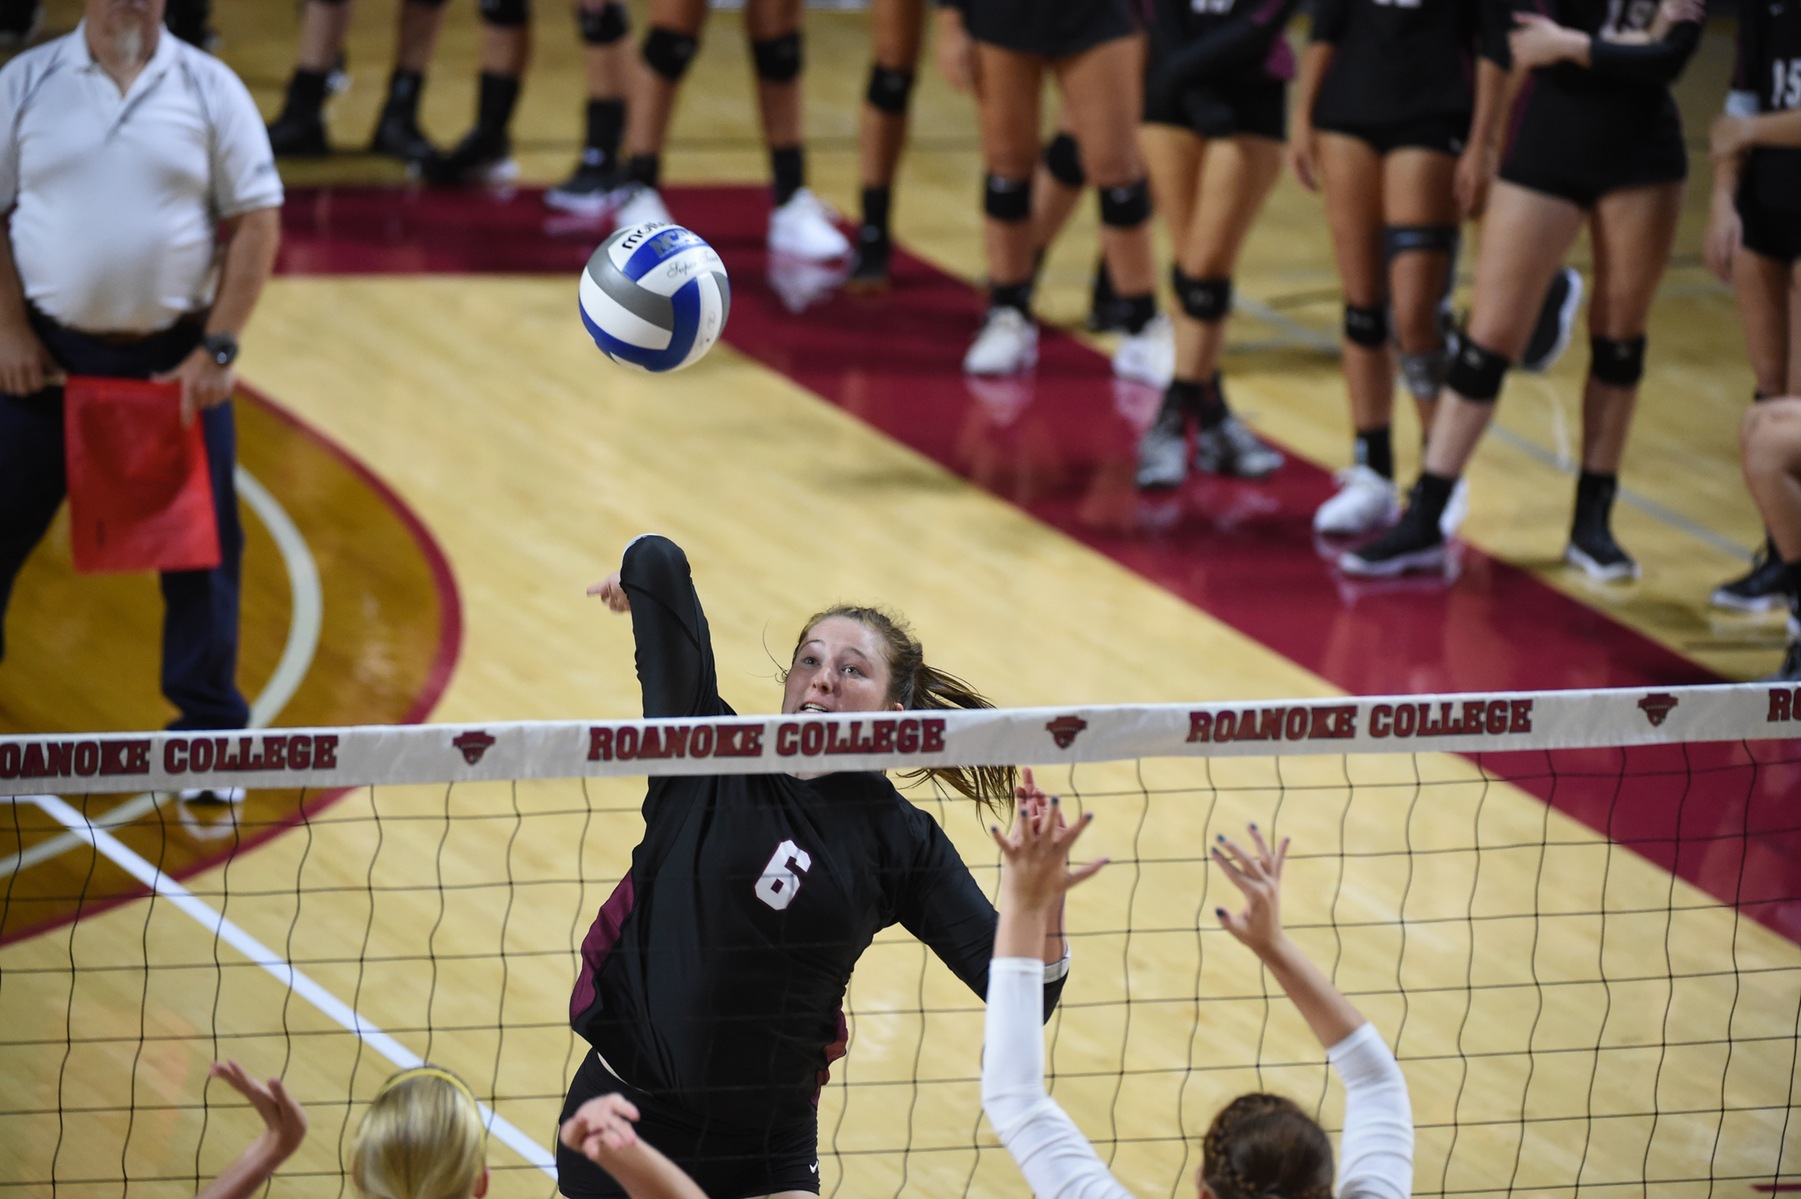 Washington and Lee knocked off Roanoke 3-0 Tuesday night in ODAC volleyball.